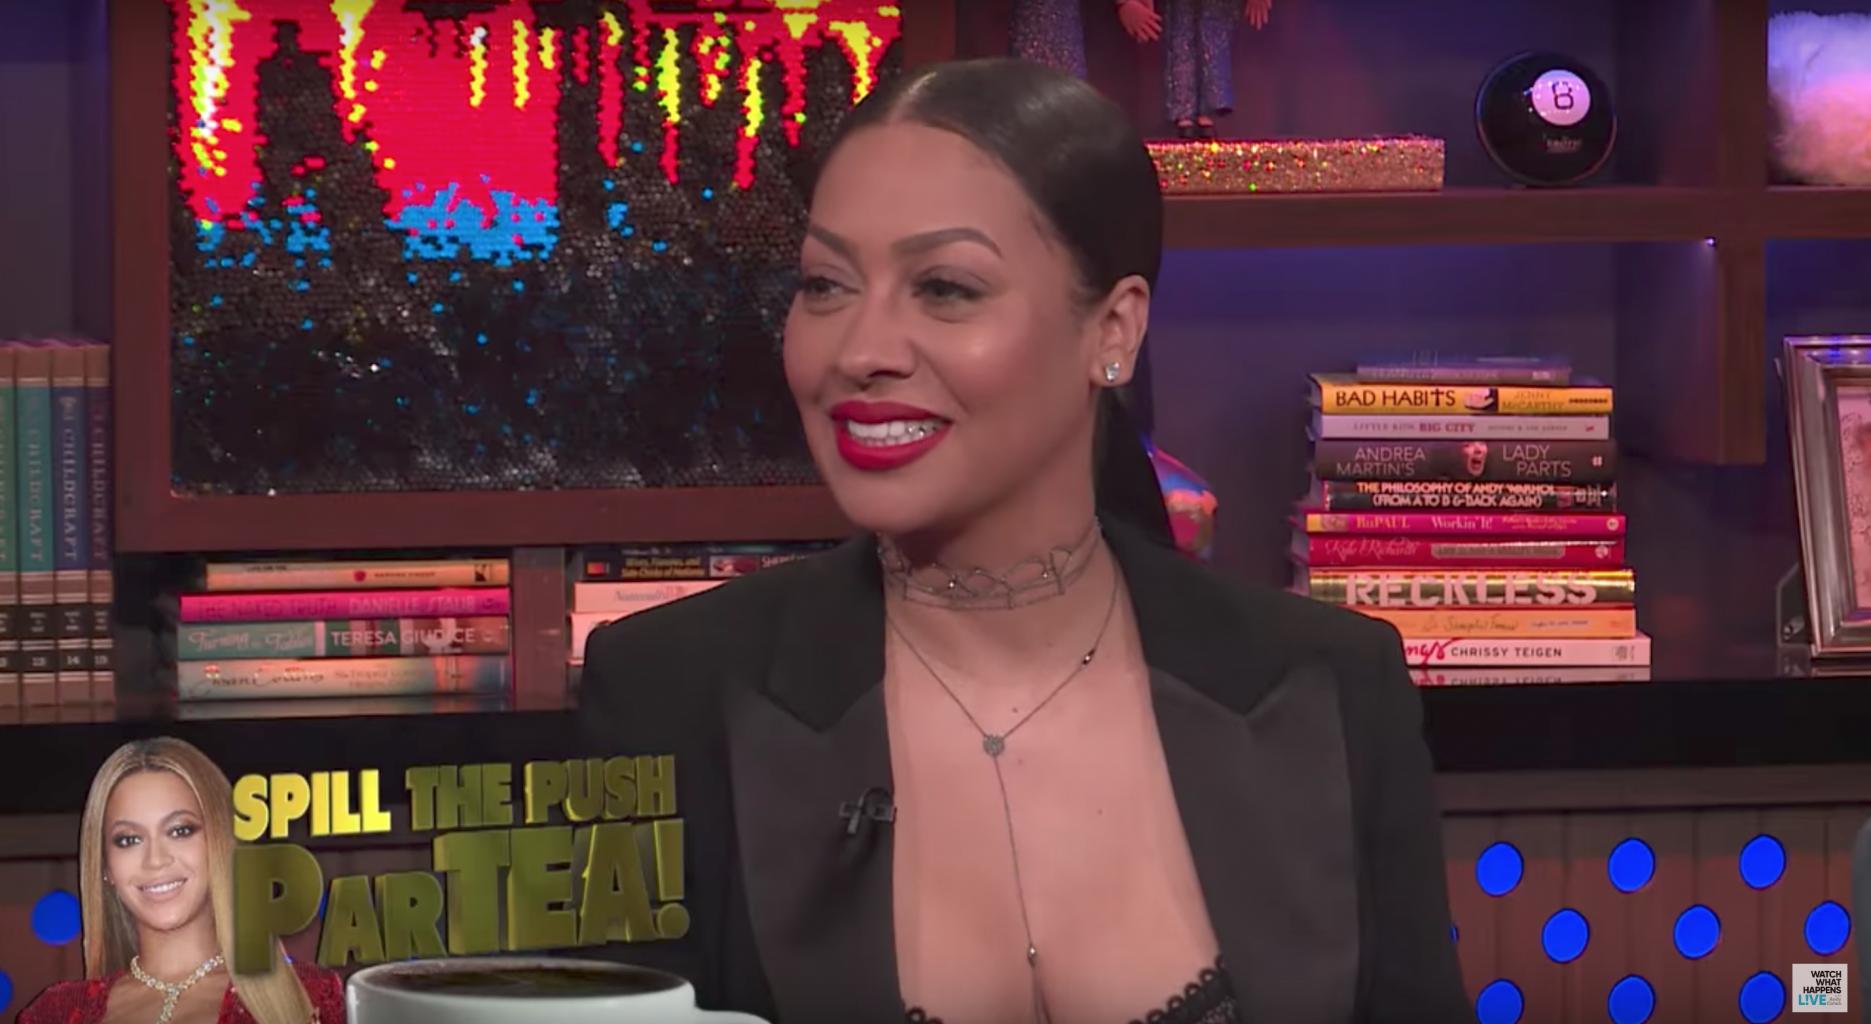 La La Anthony Stays Mostly Tight-Lipped About Beyonc    's Push Party       '  but Reveals Ms. Tina Got 'Turnt'